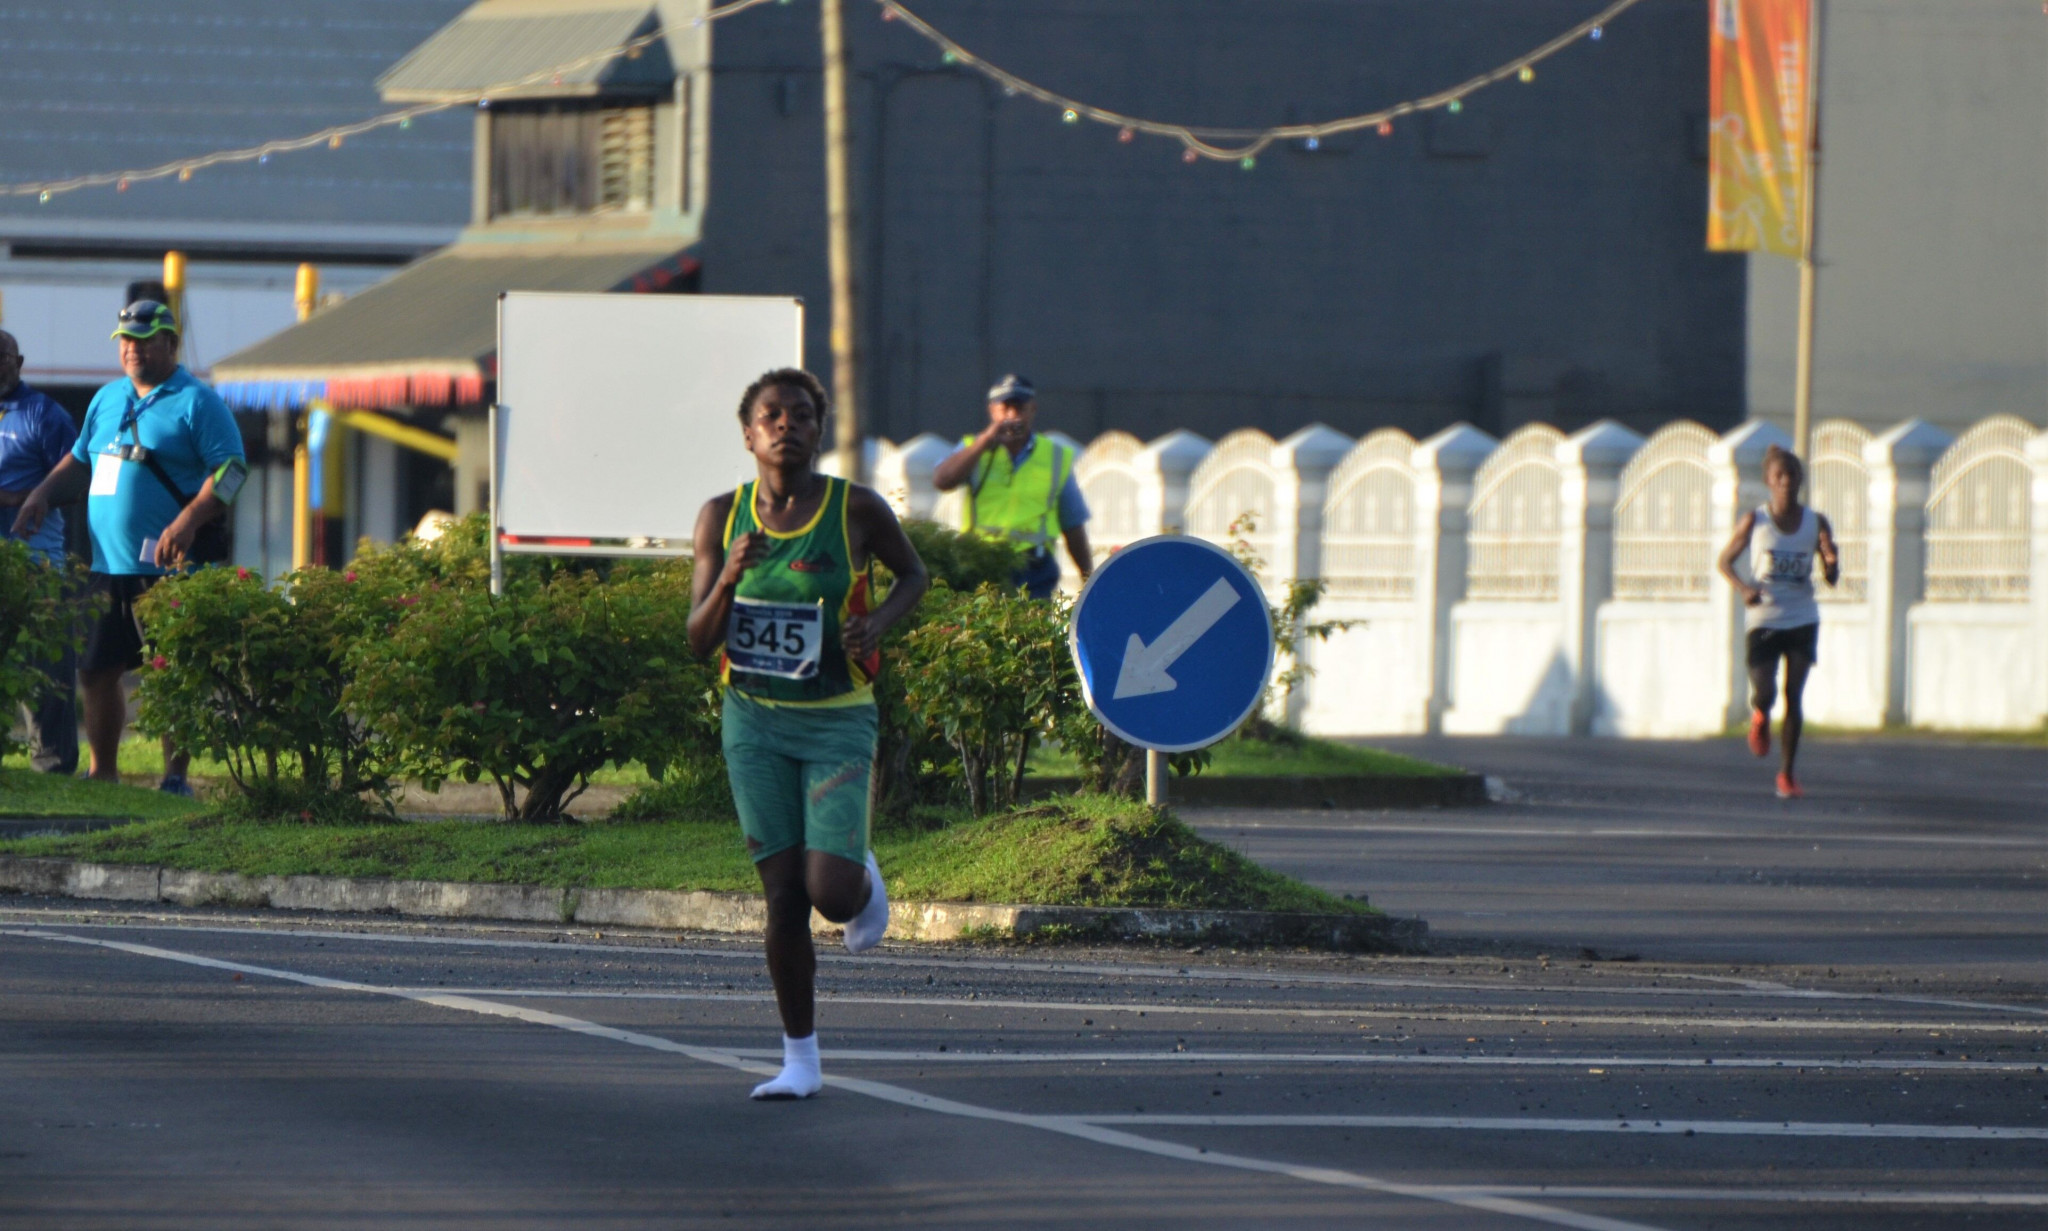 Vanuatu runner socks it to the competition by winning 2019 Pacific Games half marathon without shoes